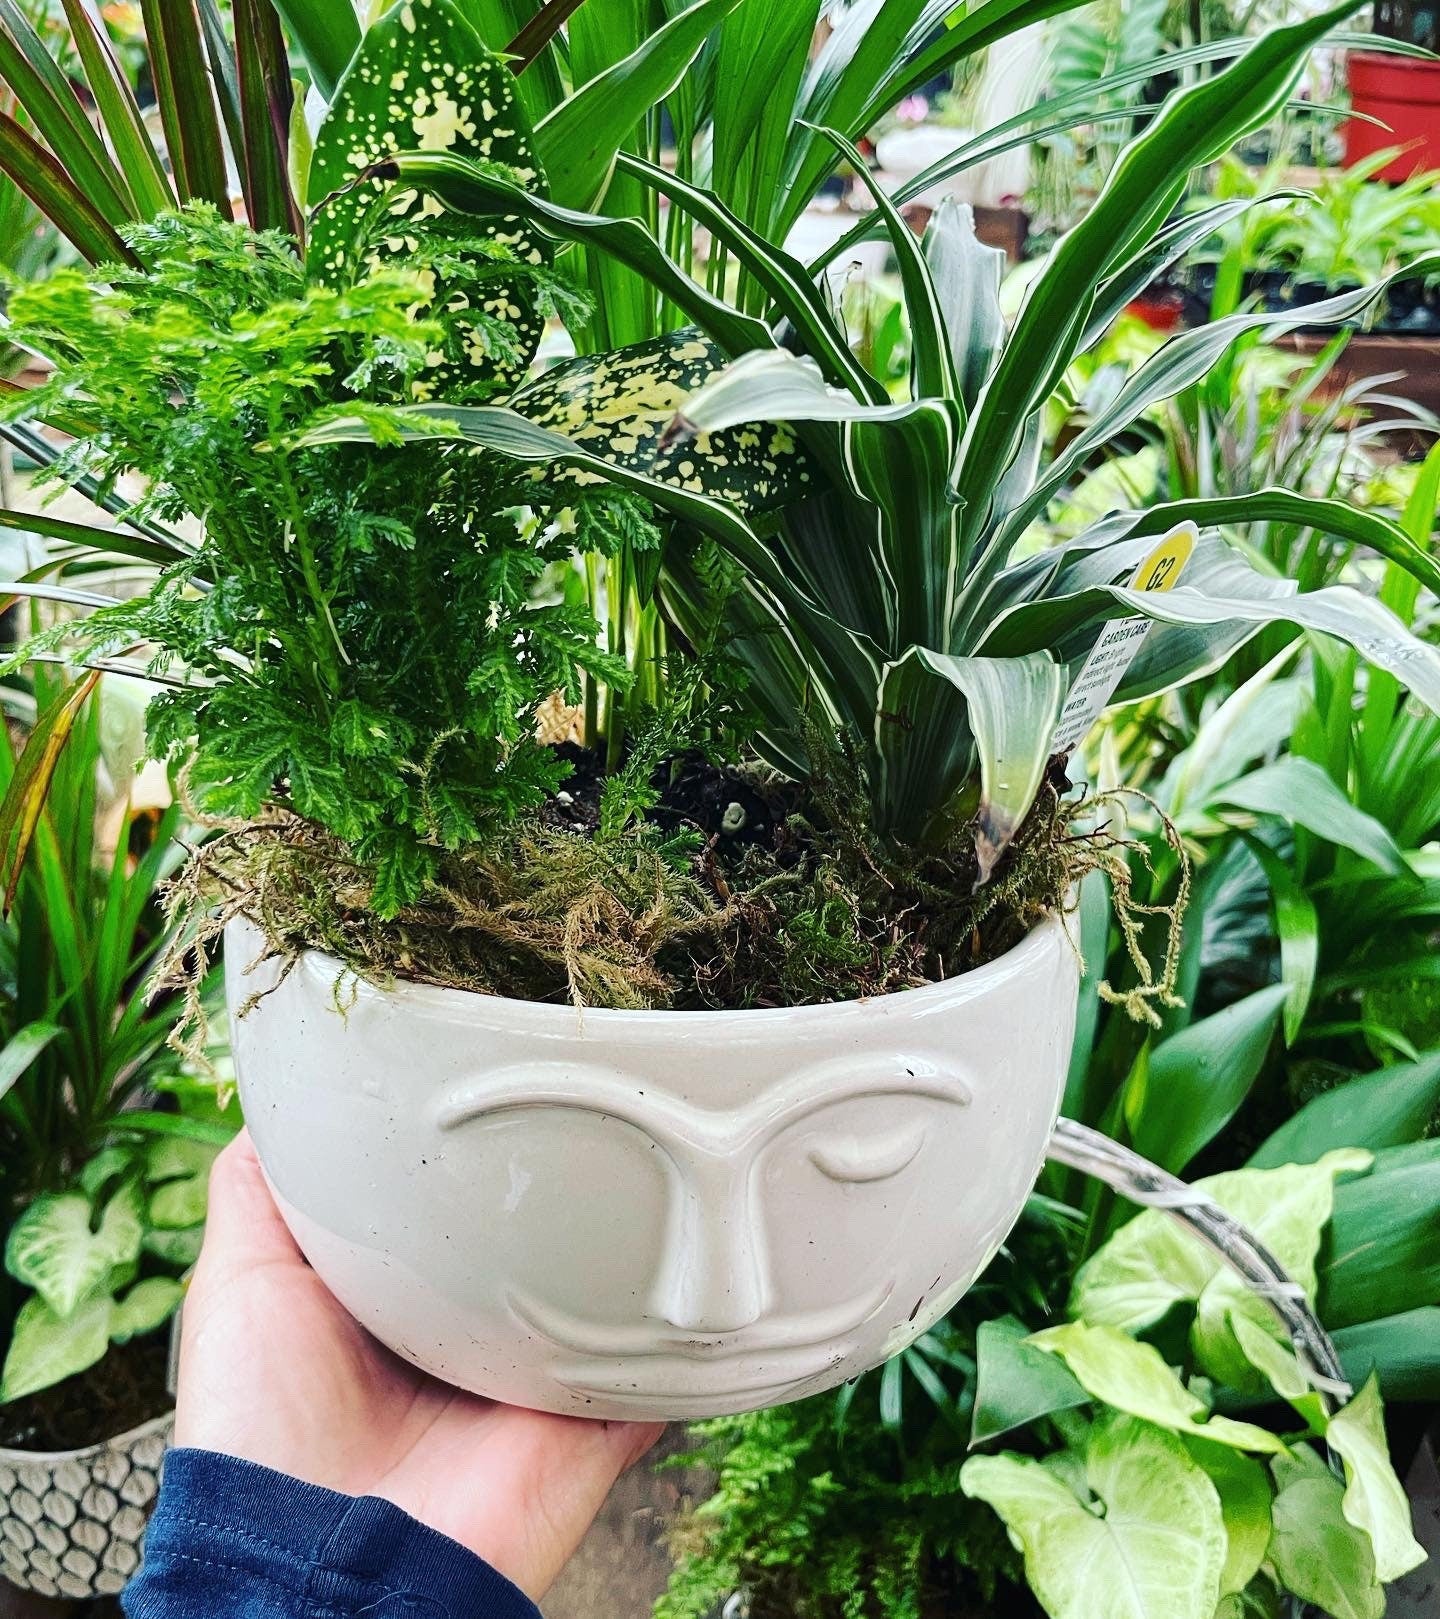 Live plant arrangement in 6 inch ceramic face pot- plants are selected based on availability and season . Will look similar not exact